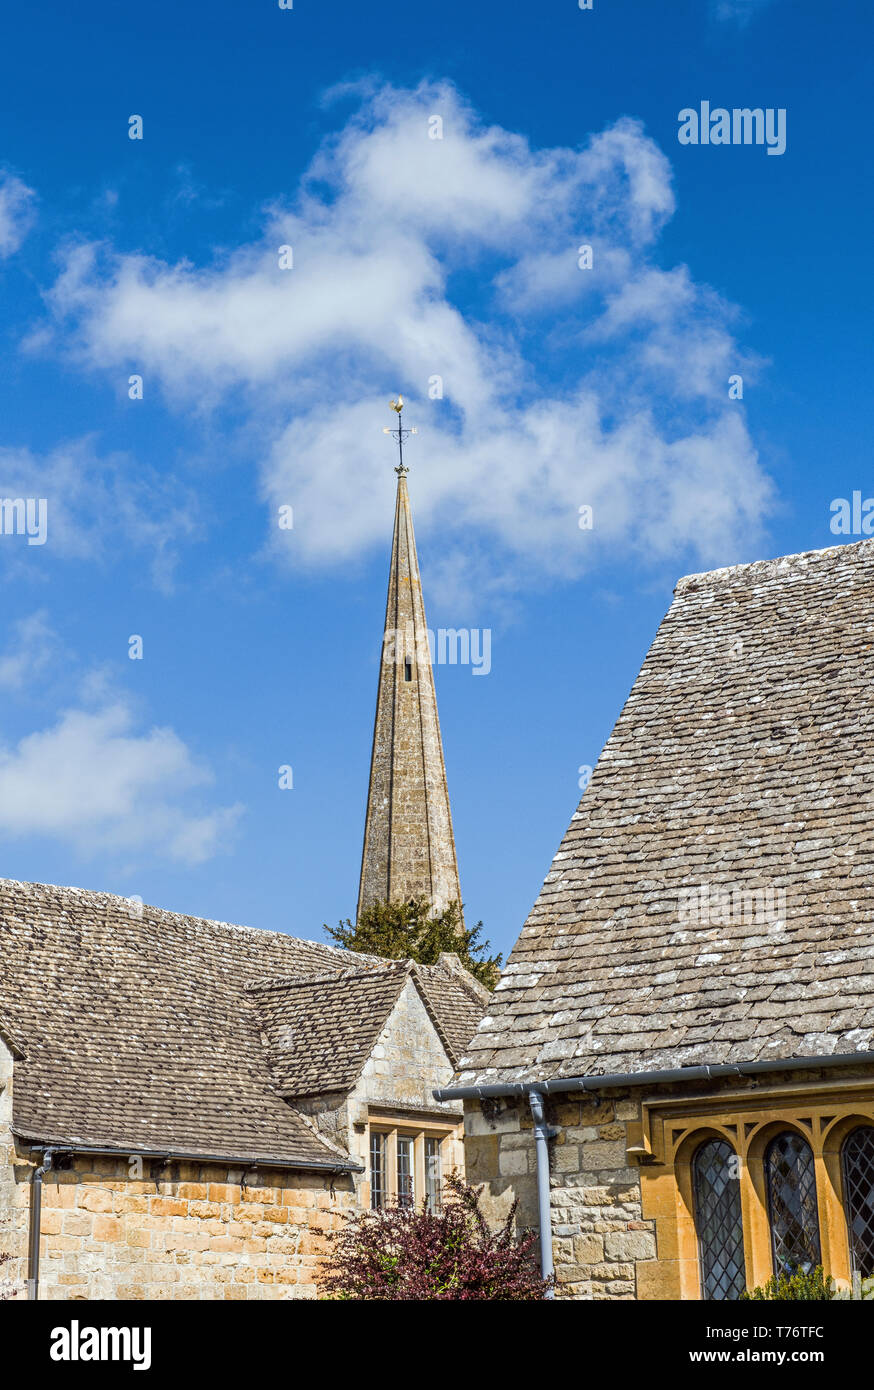 The spire of Stanton church rising between two buildings in the Cotswolds Gloucestershire England Stock Photo